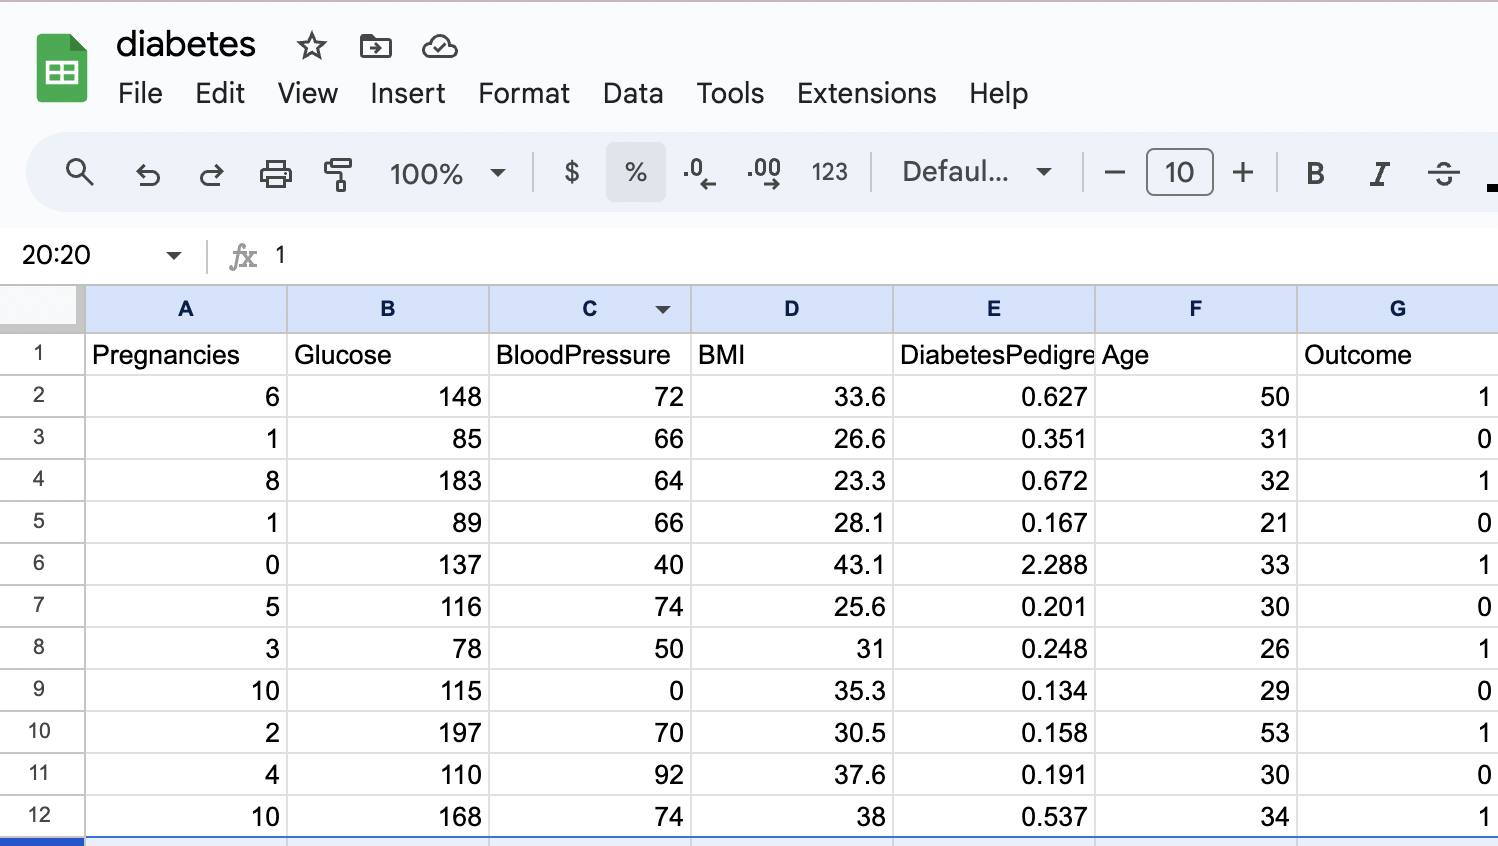 Google Sheets showing the diabetes.csv file. The Pregnancies, Glucose, Blood Pressure, BMI, Diabetes Pedigree, Age, and Outcome columns are visible